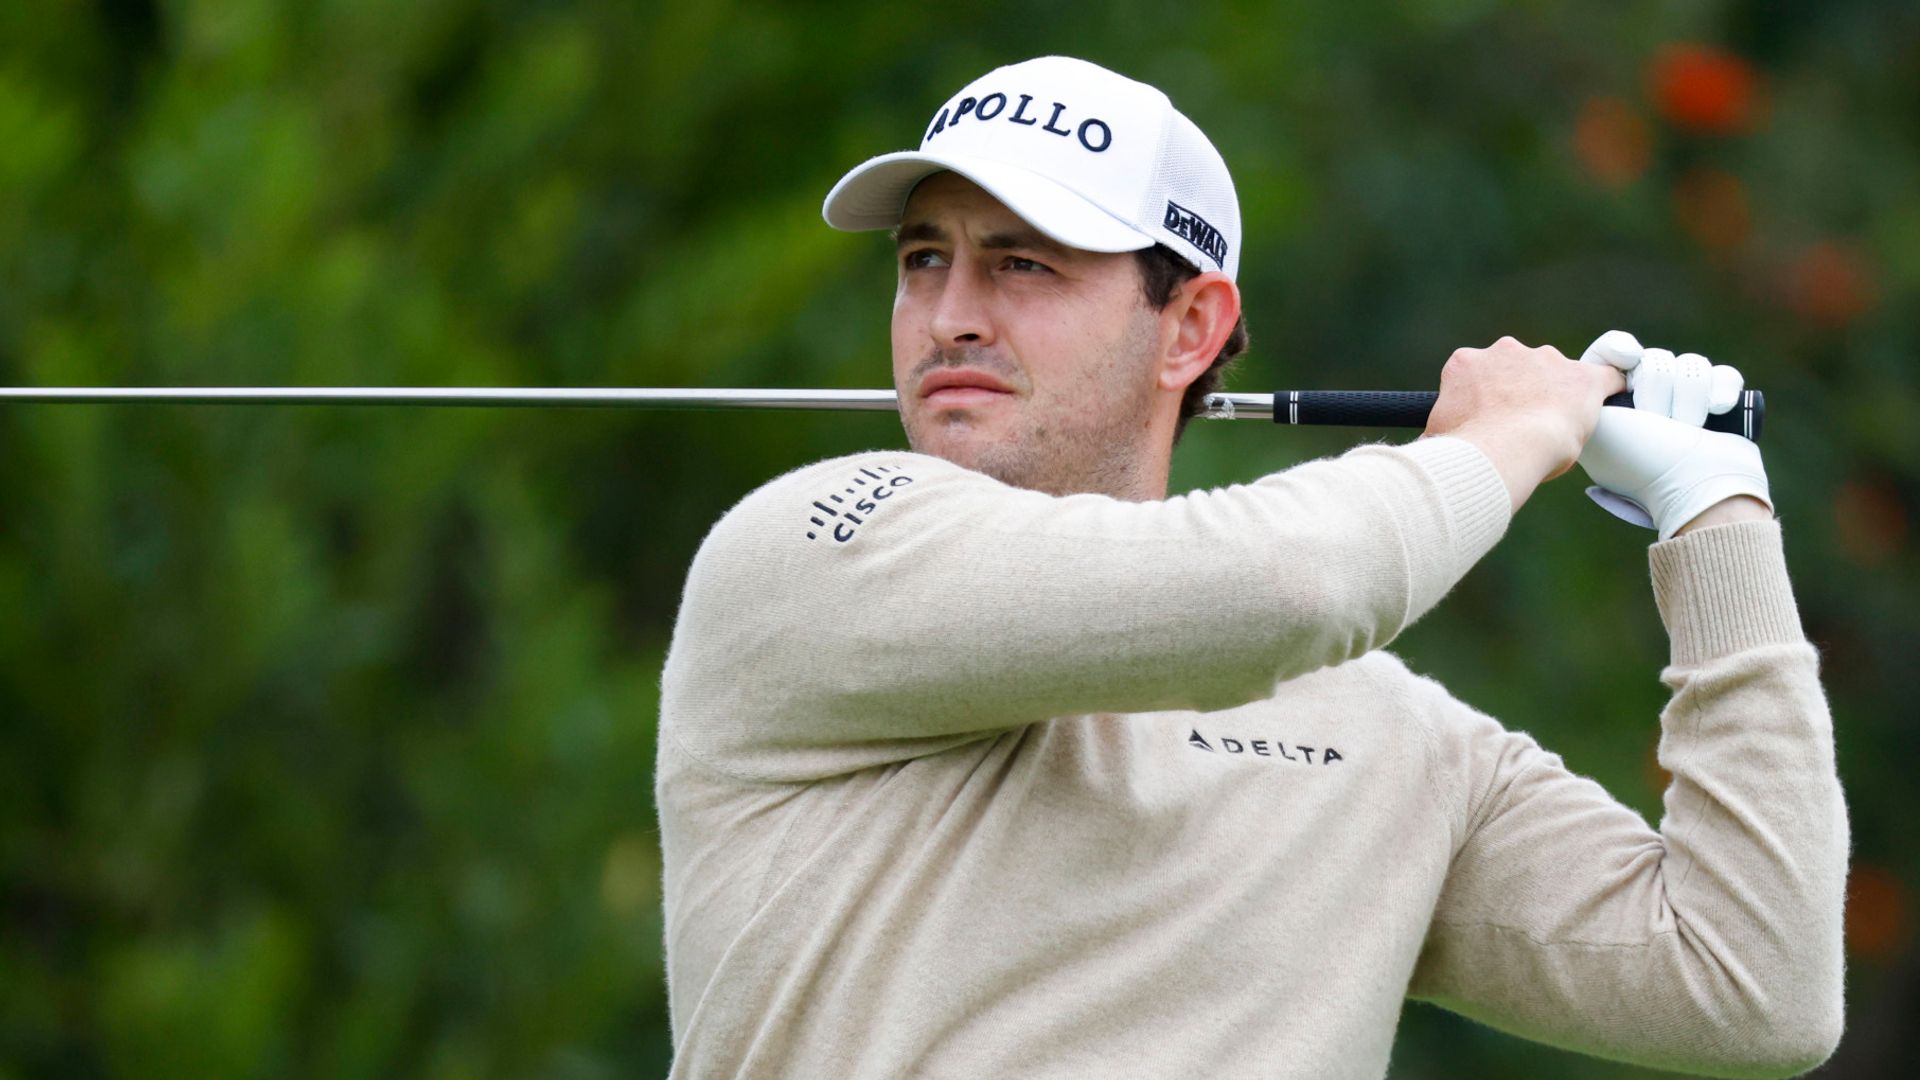 Cantlay 'in a good position' going into Genesis Invitational final round